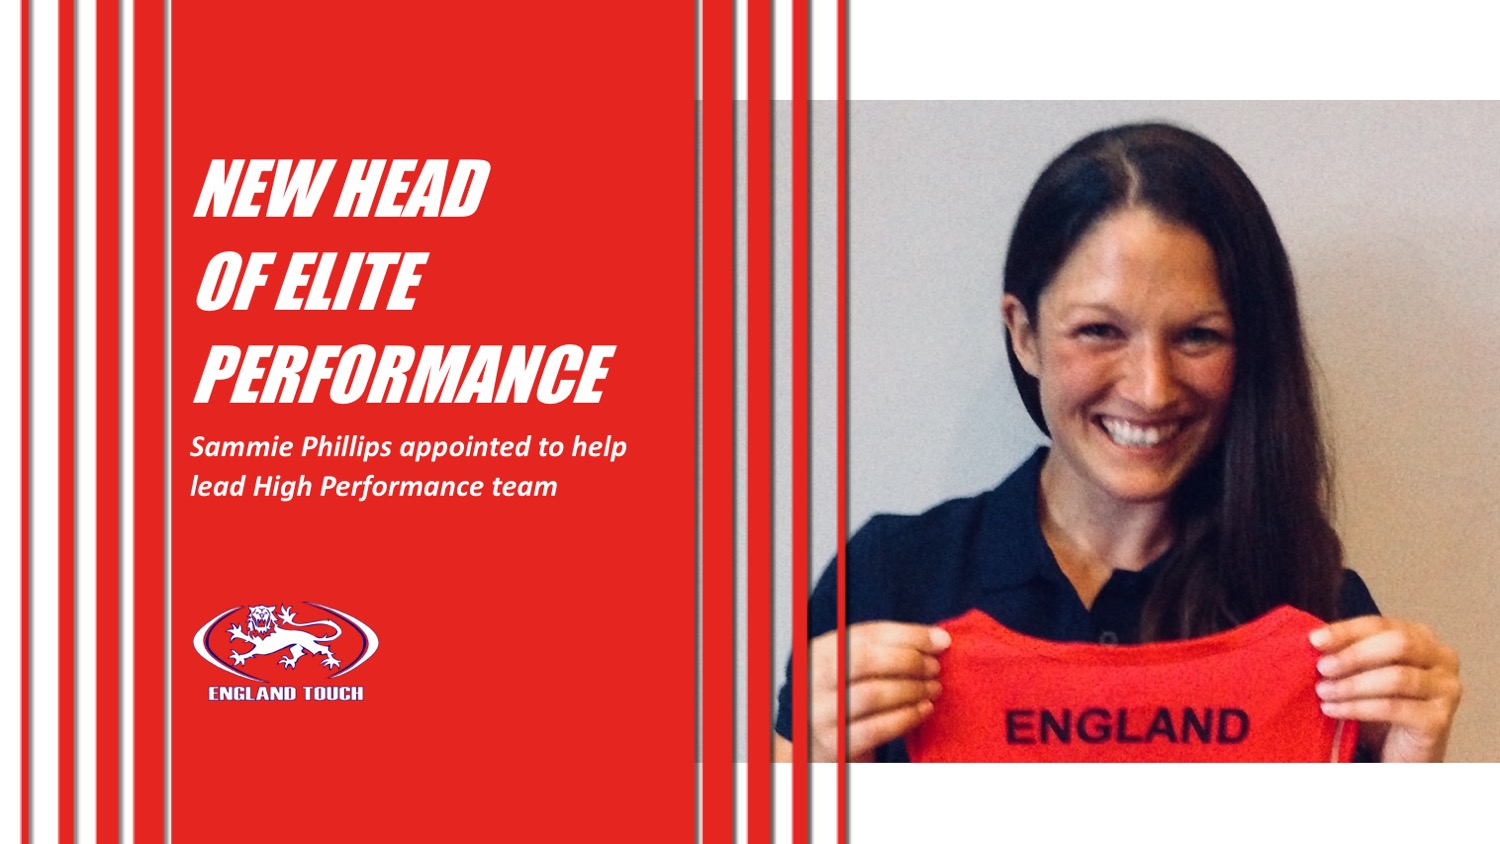 Sammie Phillips appointed as Head of Elite Performance